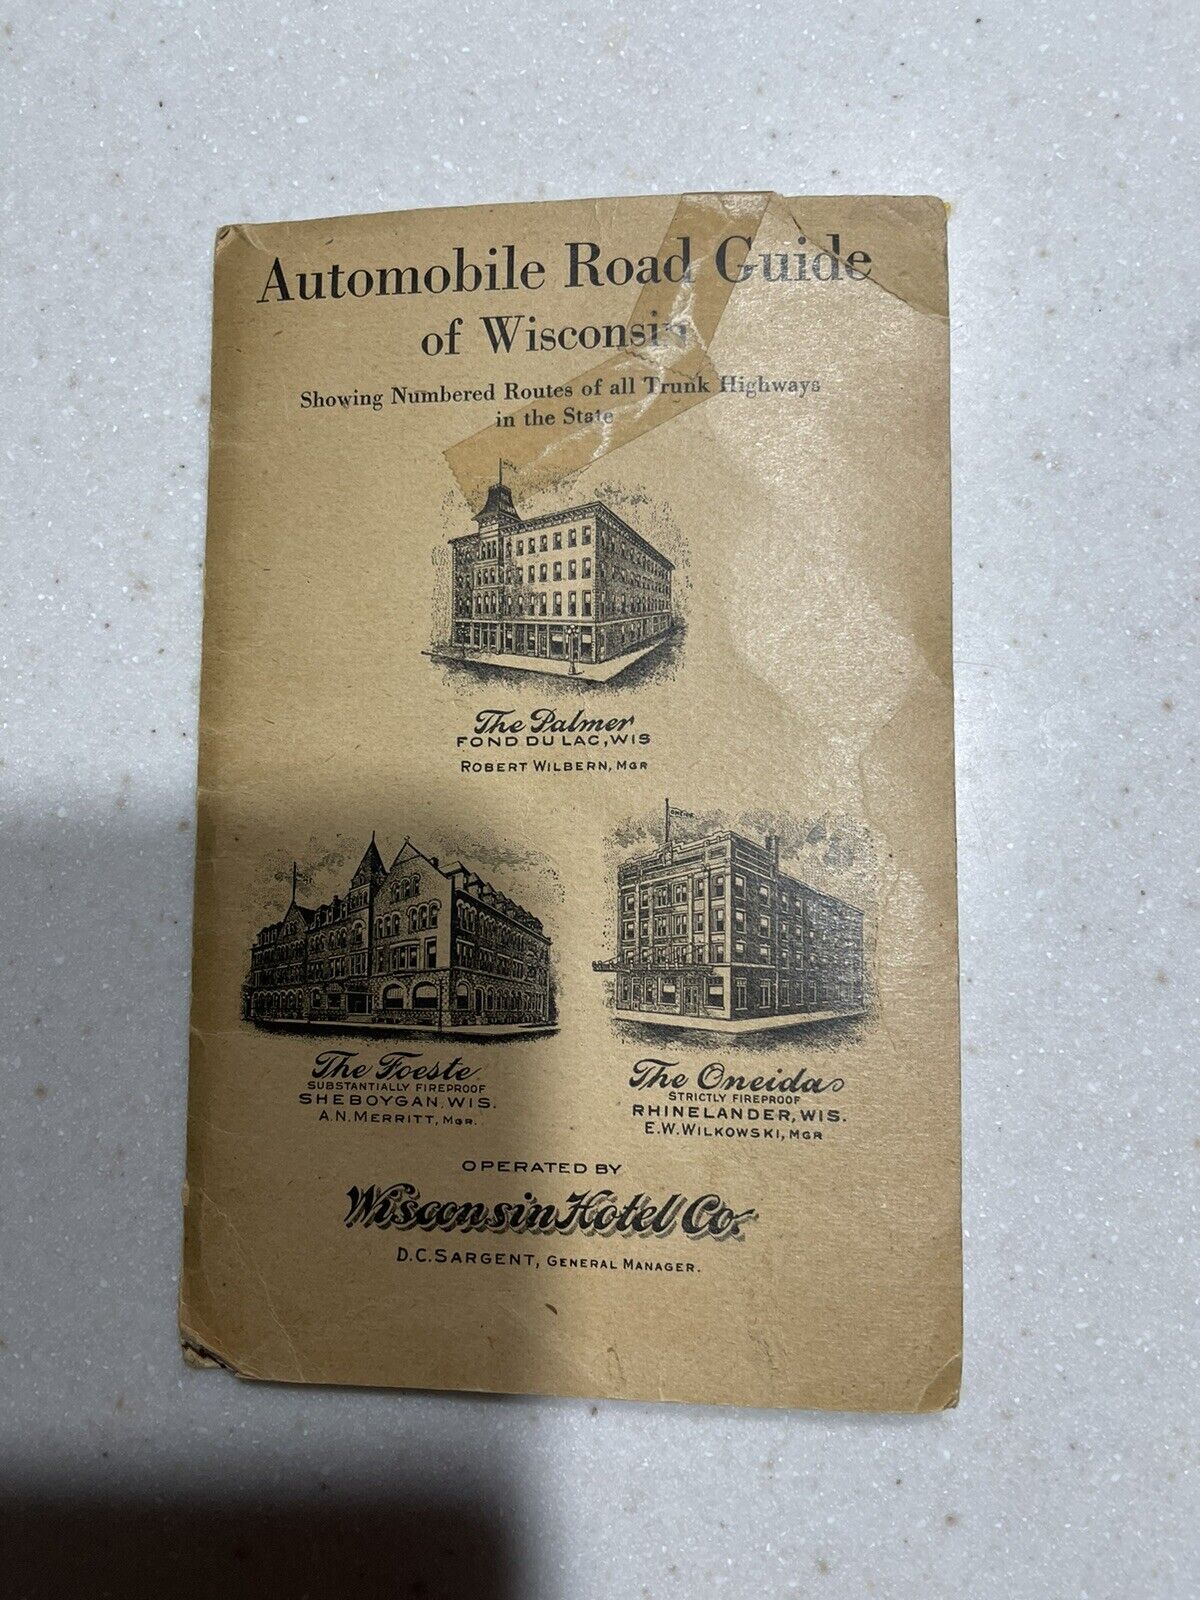 Wisconsin Automobile Road Guide Map 1900’s Wisconsin Hotel Co.